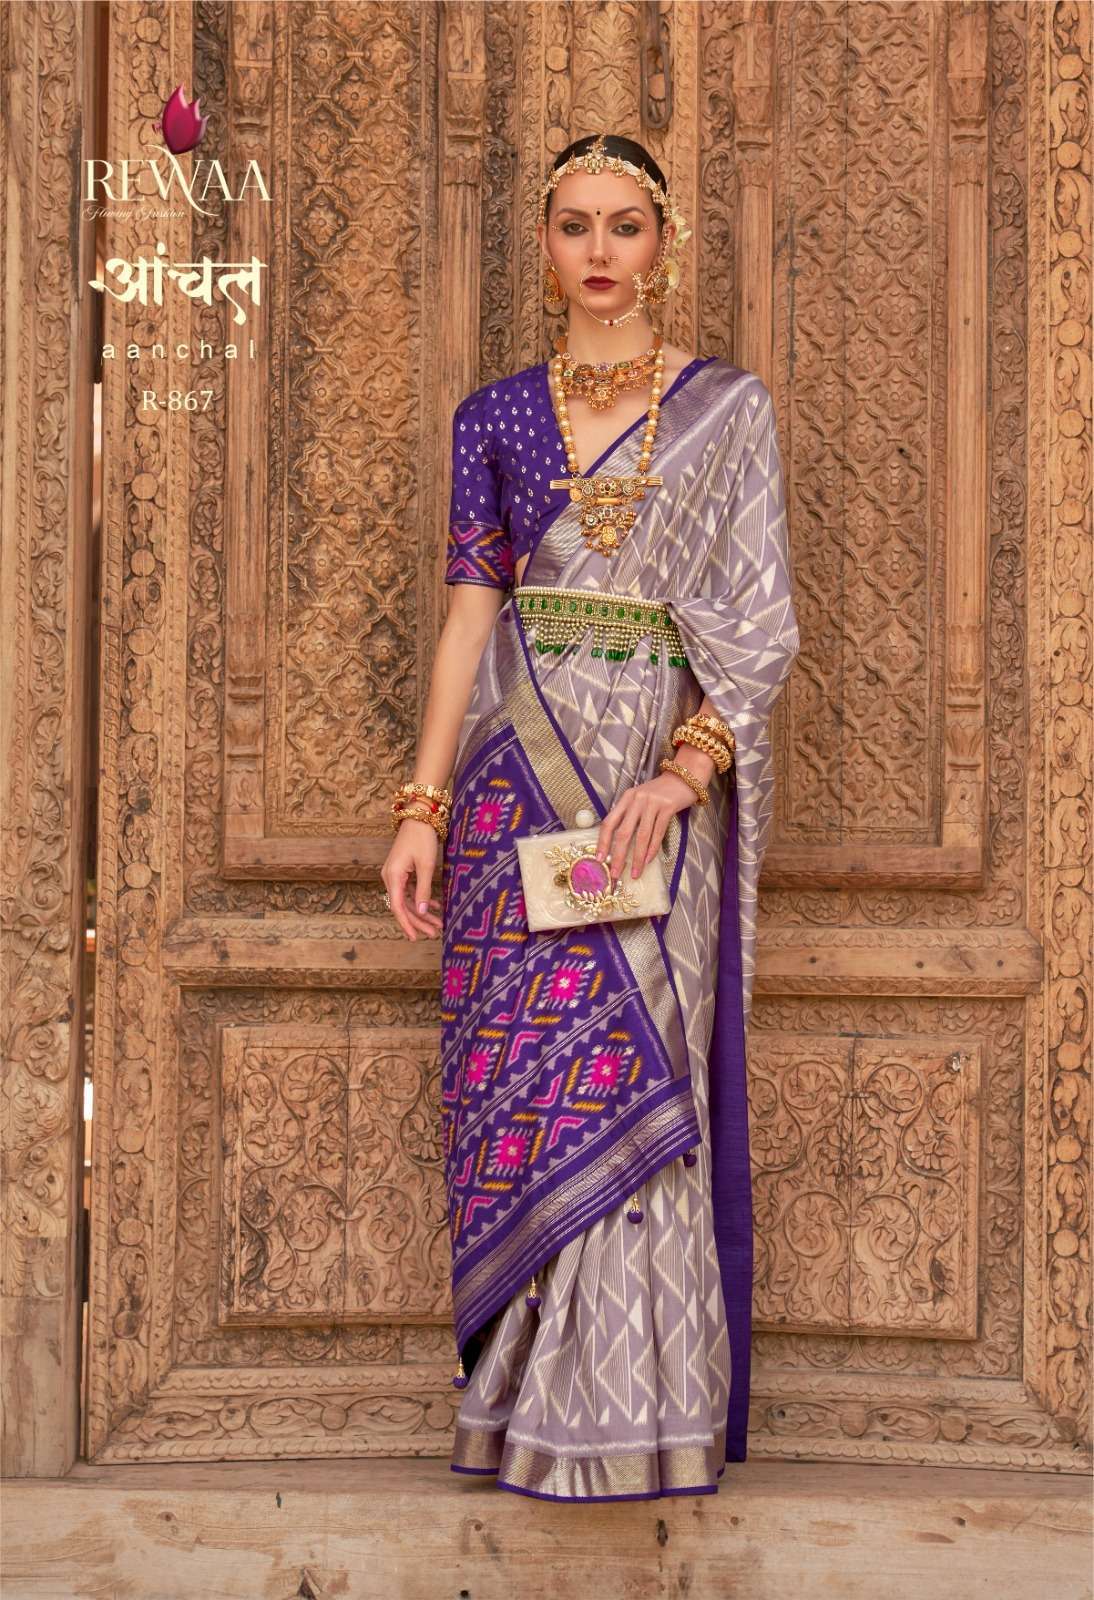 Rewaa fashion Aanchal Silk with Ethnic style fancy saree col...